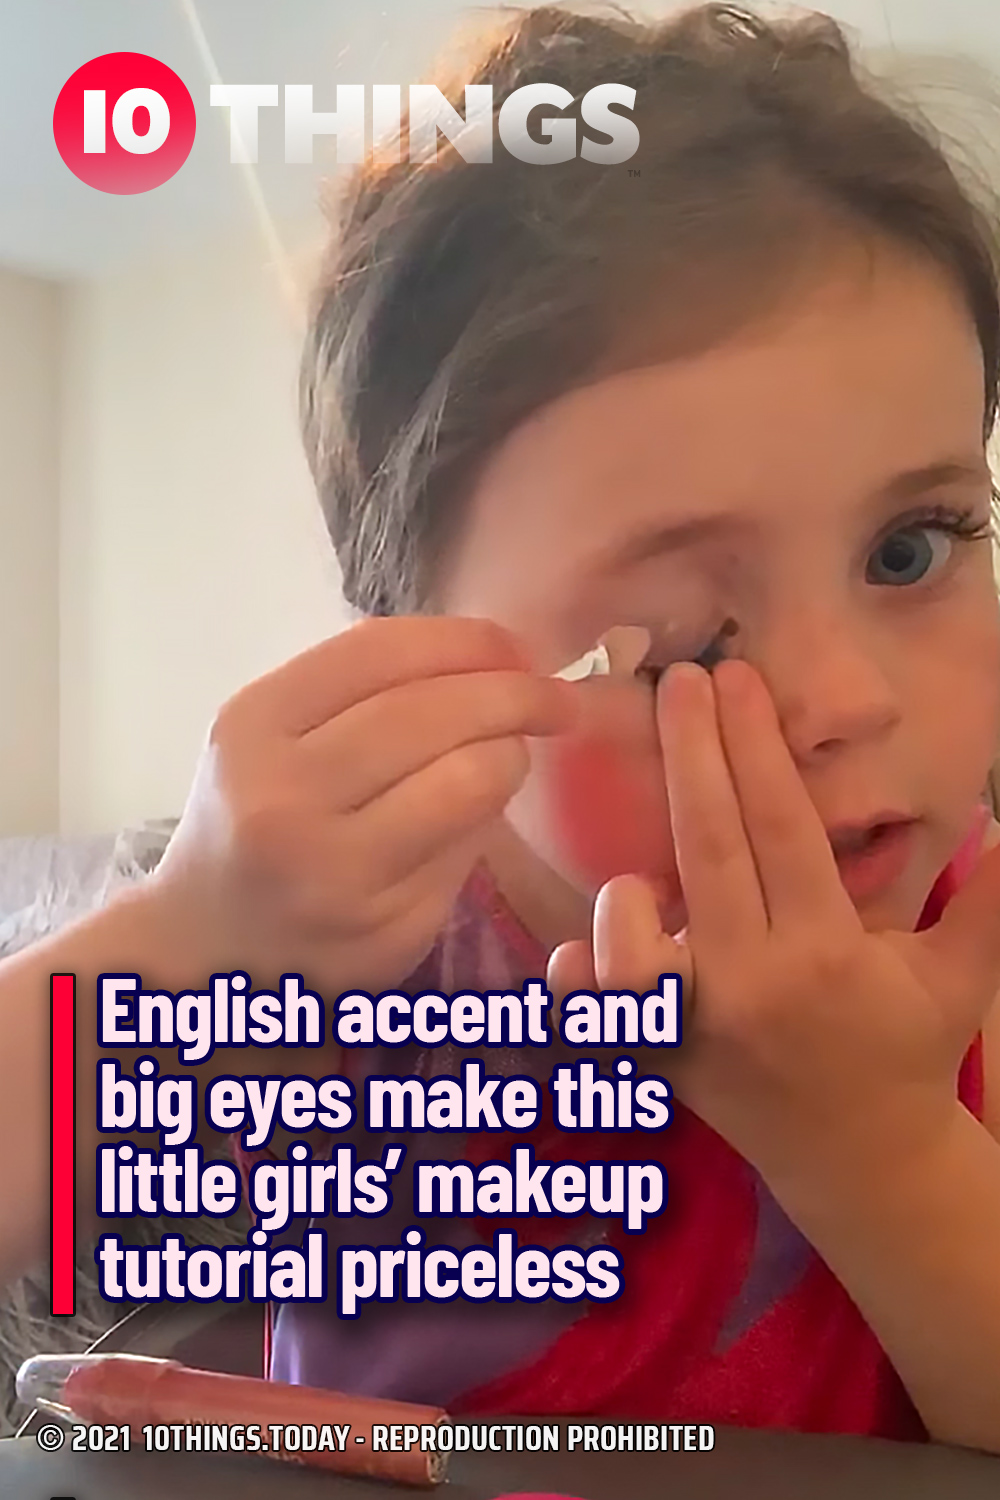 English accent and big eyes make this little girls’ makeup tutorial priceless